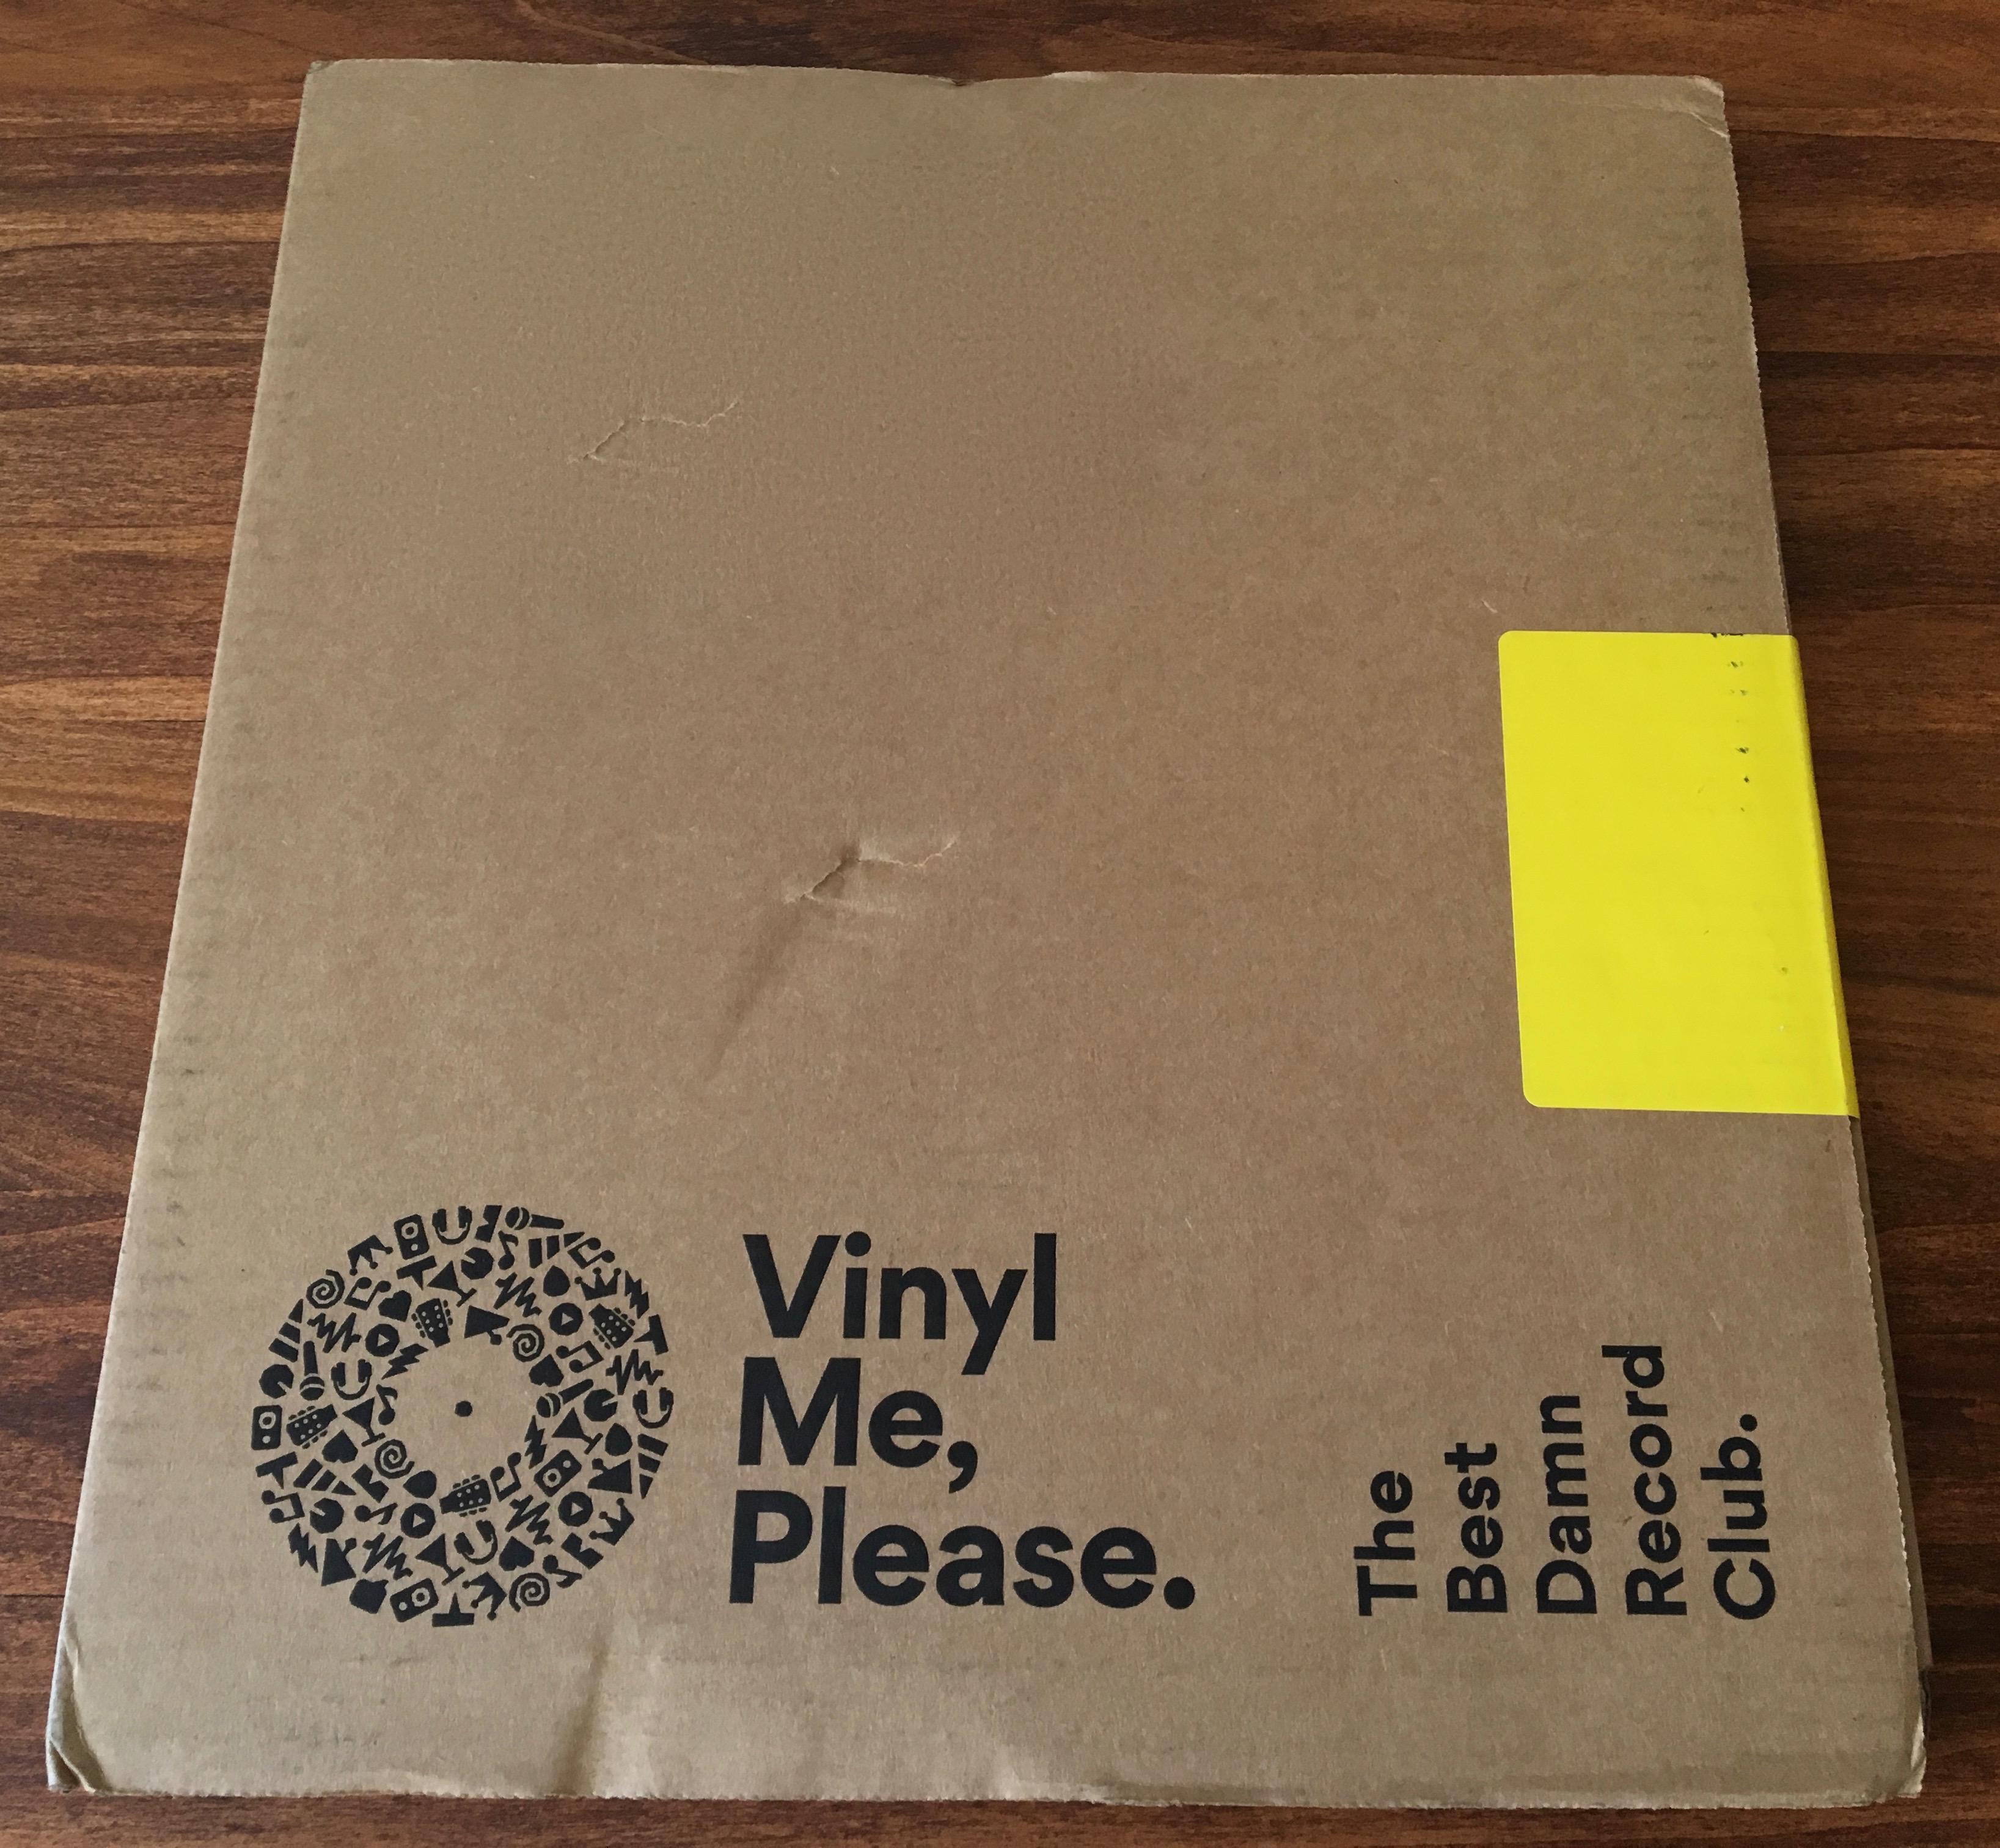 Geek insider, geekinsider, geekinsider. Com,, vinyl me, please june edition: kevin morby 'city music', entertainment